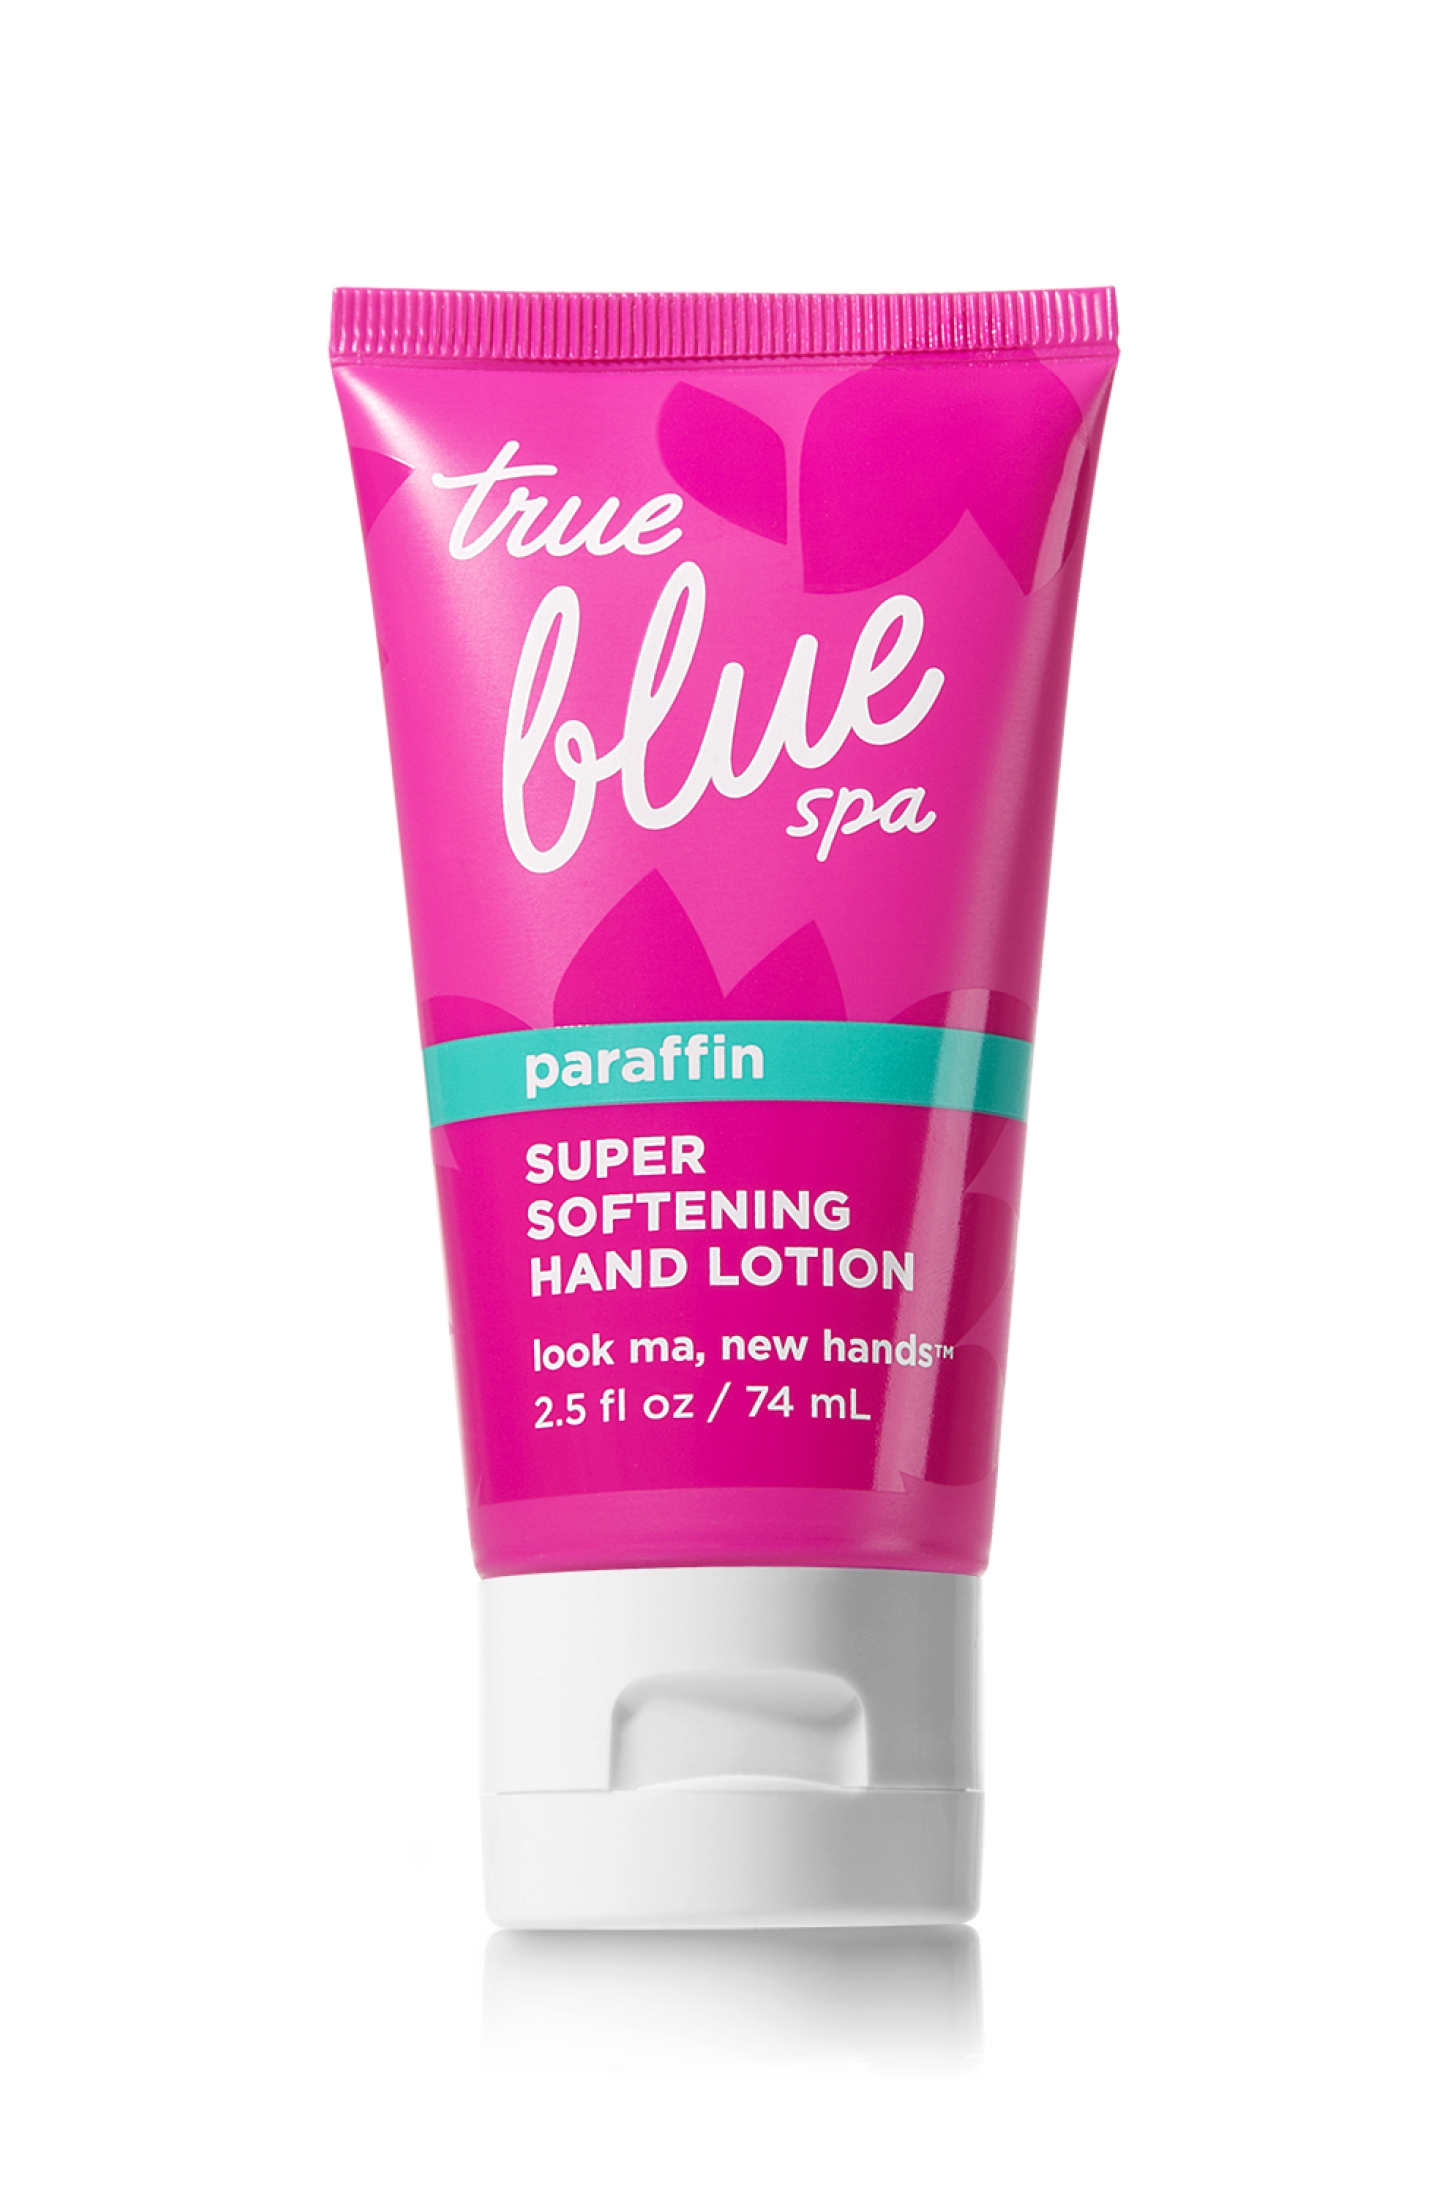 True Blue Spa Super Softening Hand Lotion with Paraffin